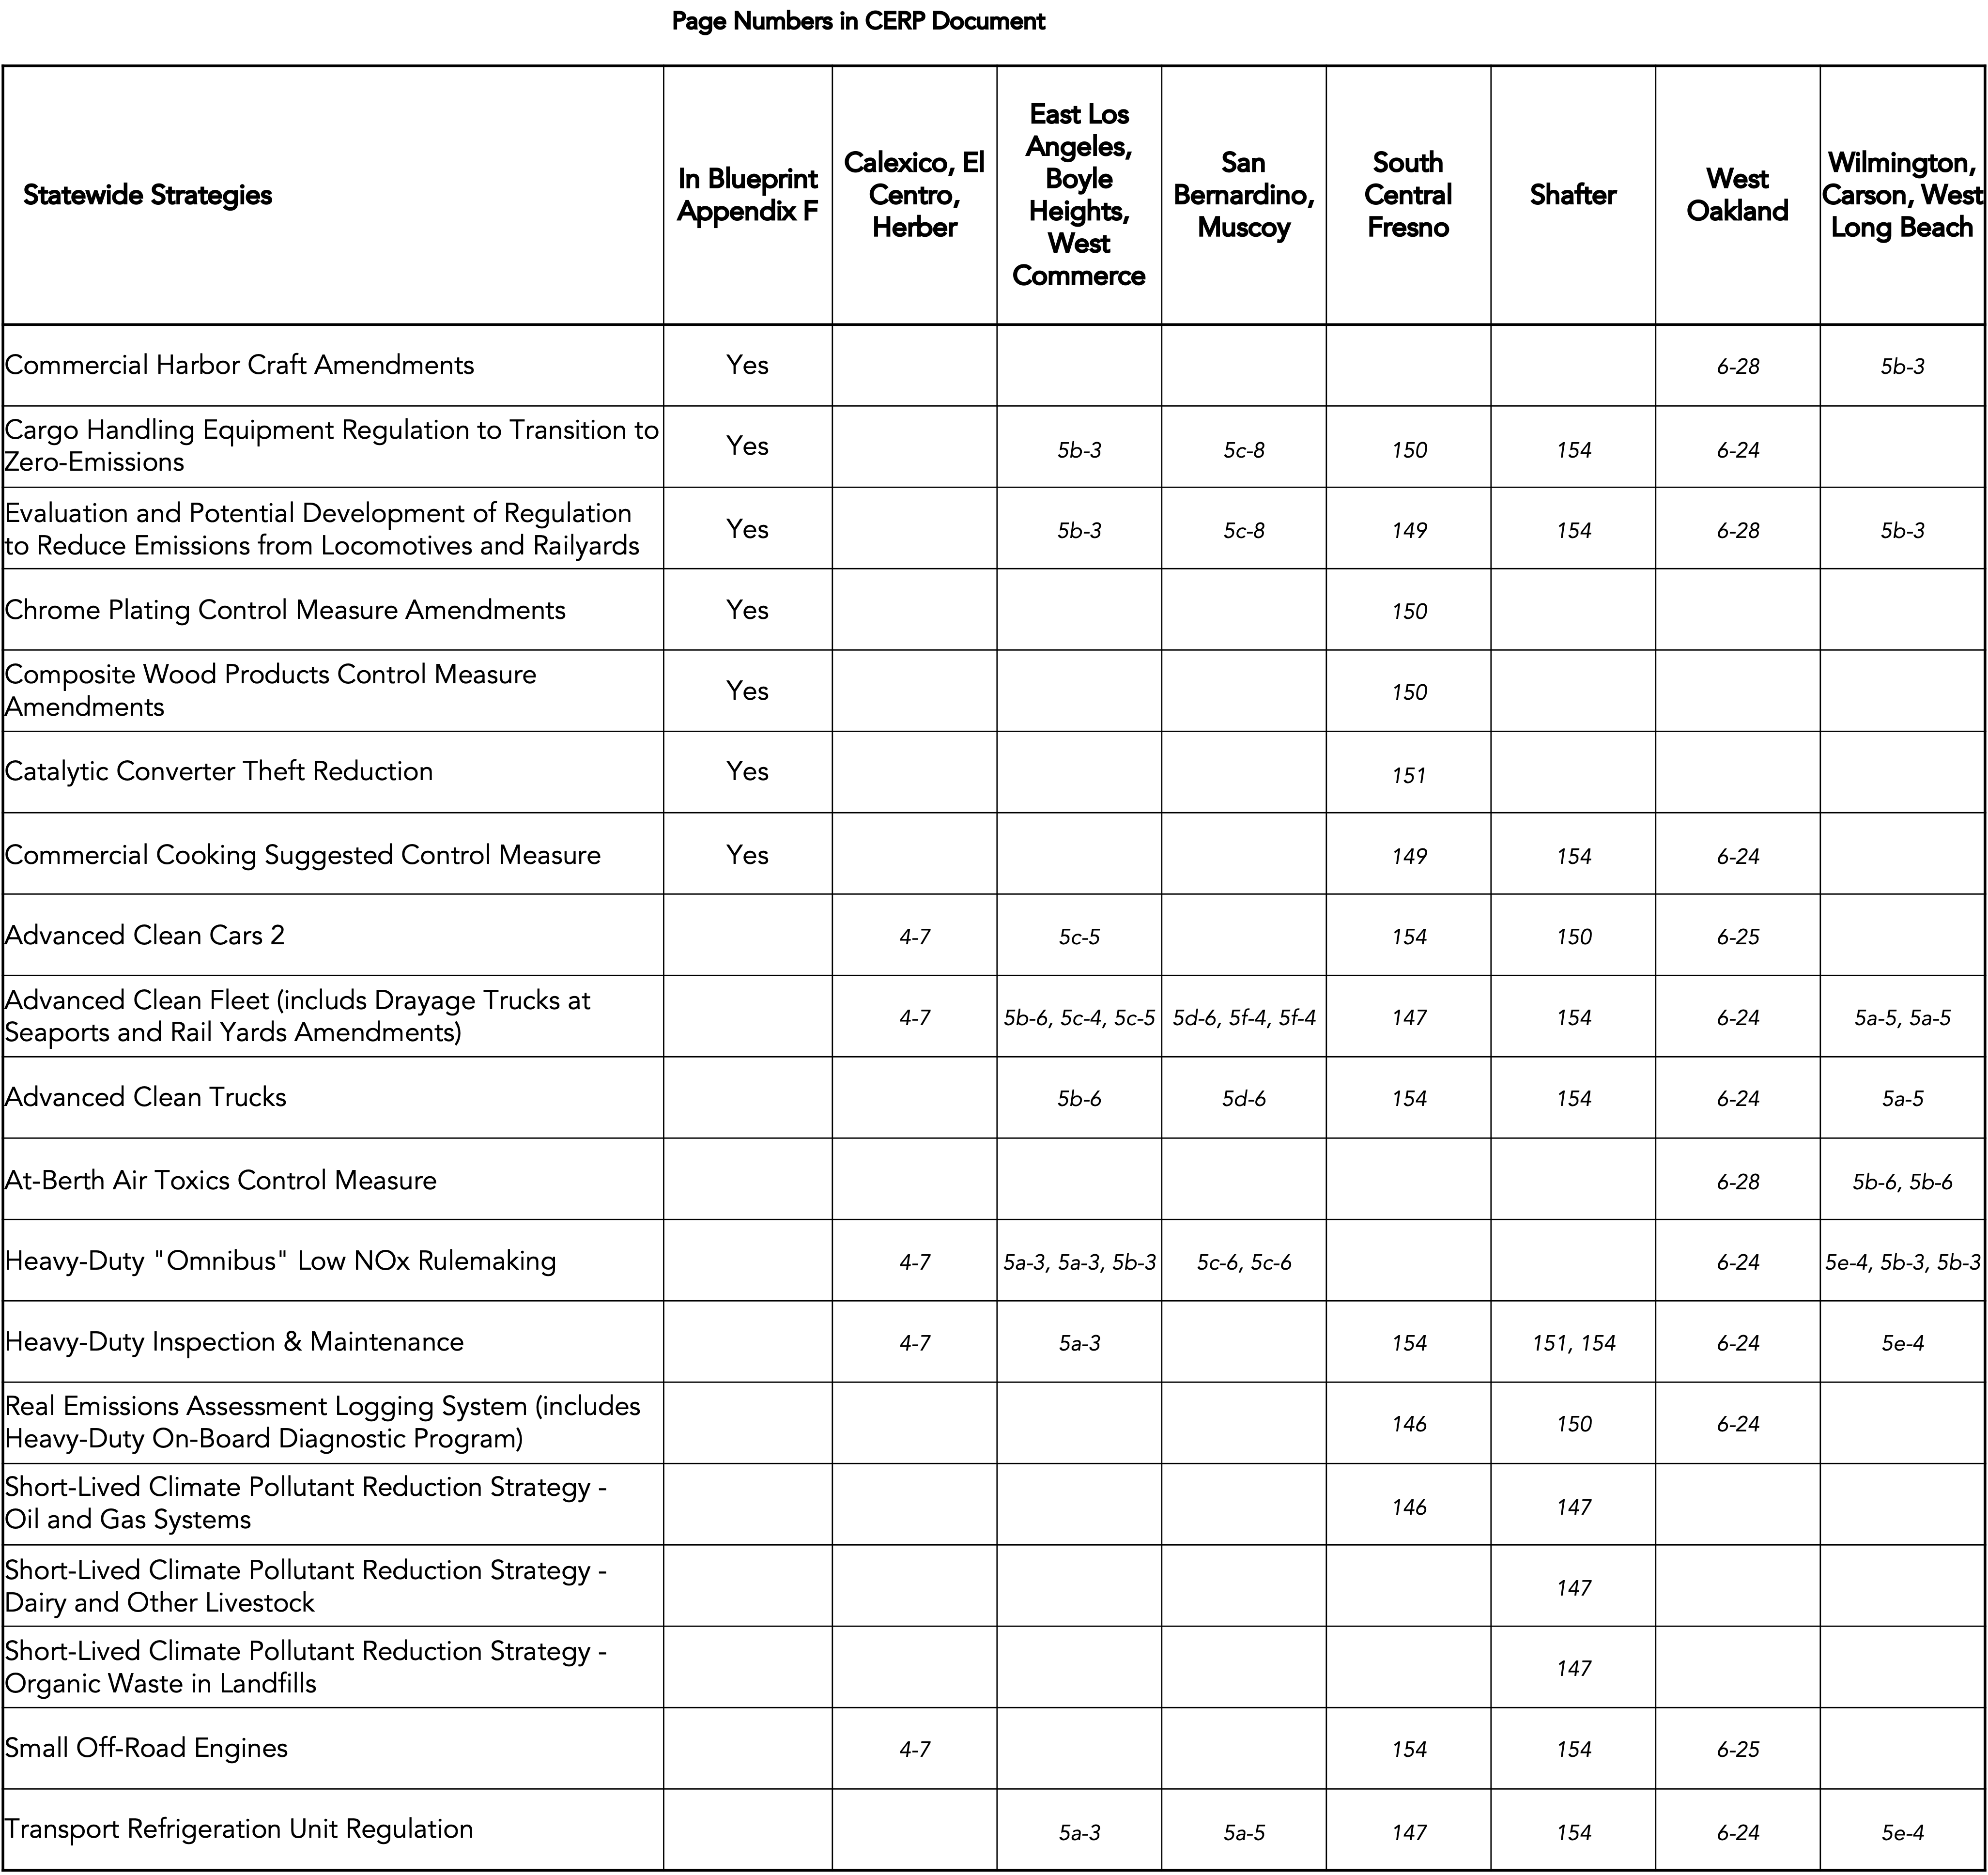 This table describes the page number references of these regulations in the community emissions reduction programs.